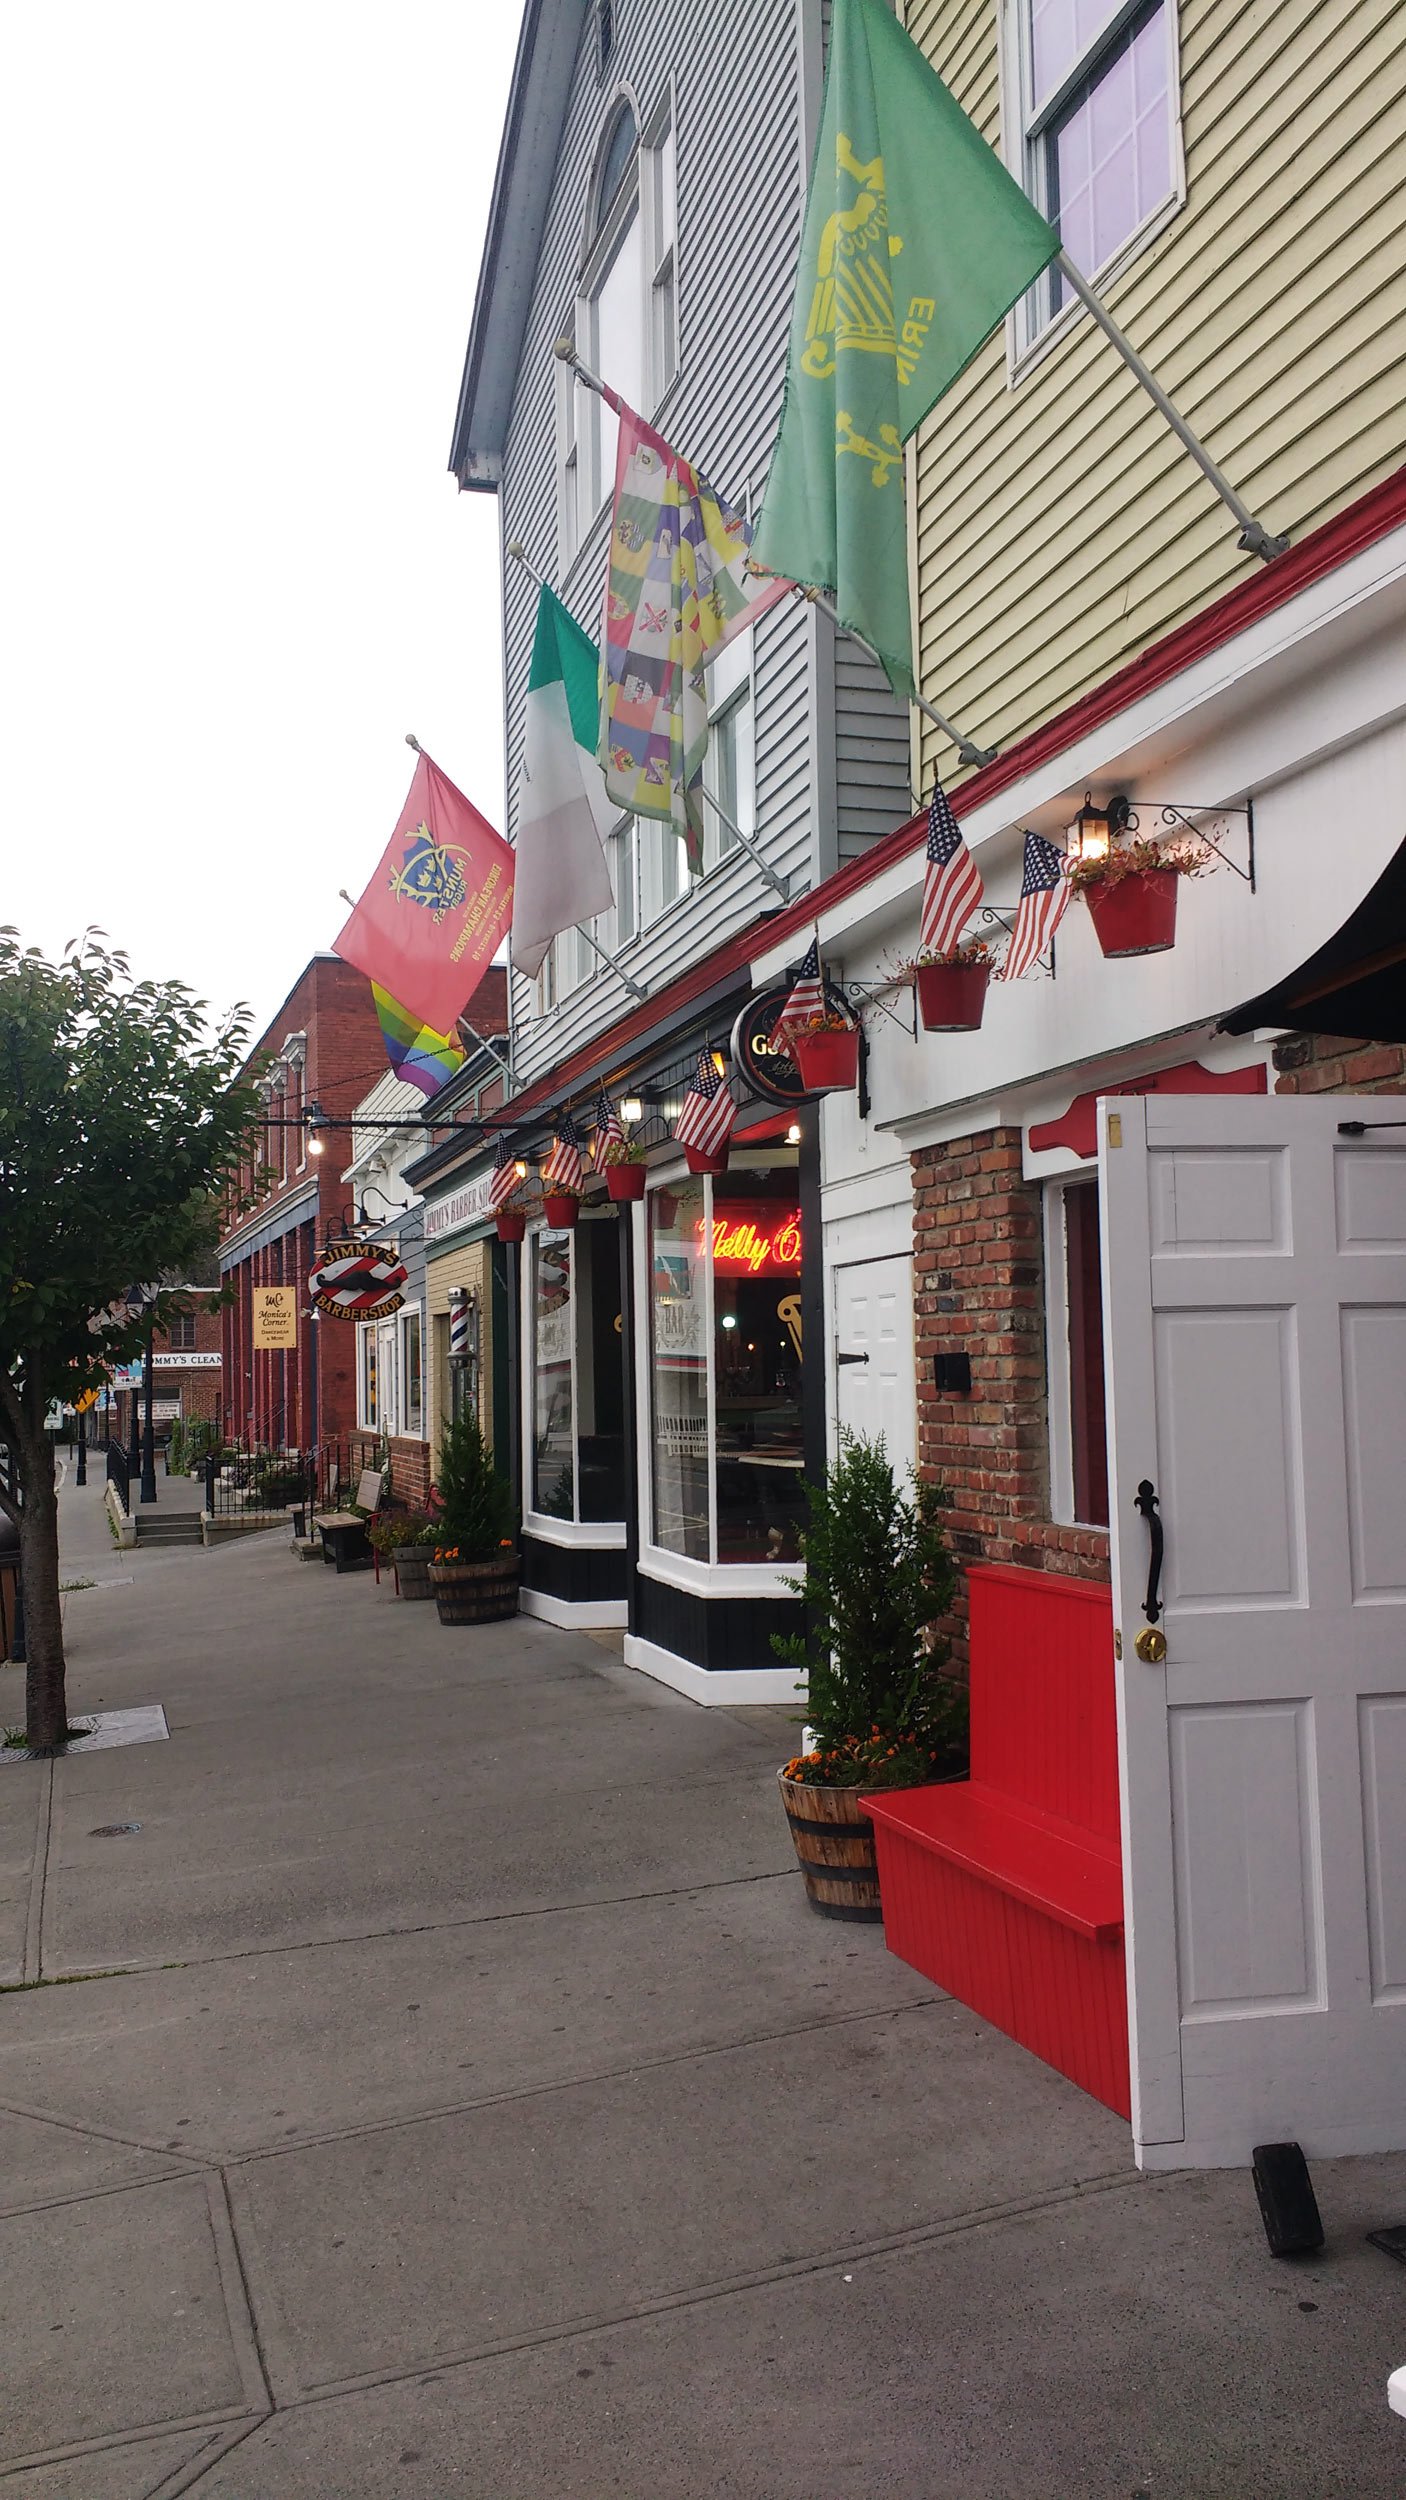 cute-shops-and-flags-in-a-downtown-street-in-new-miliford